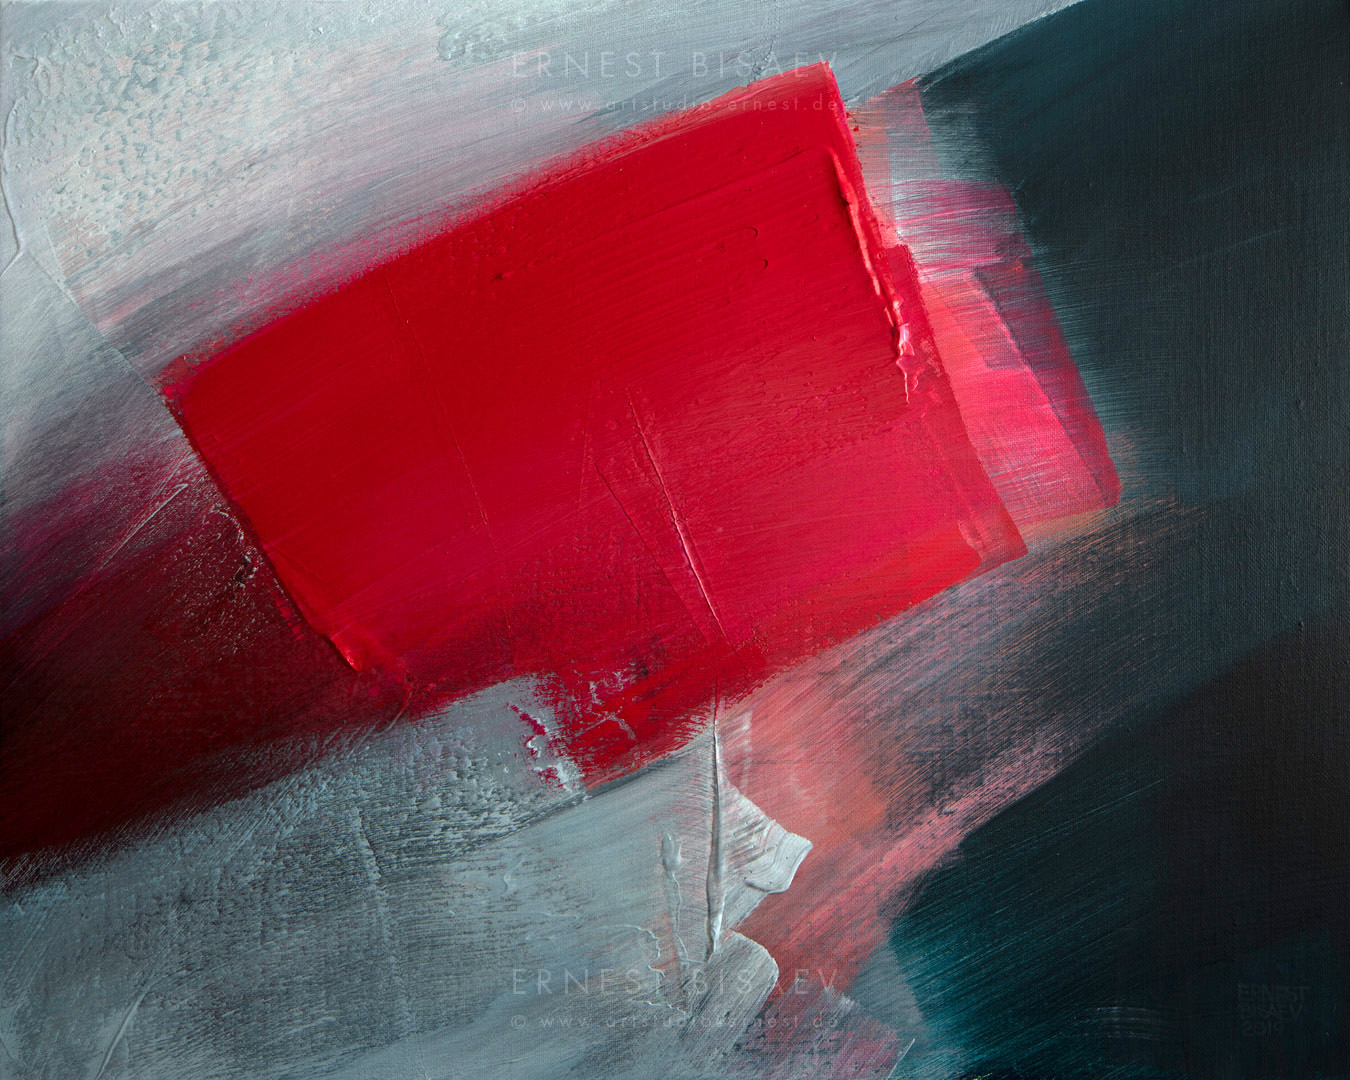 Gray and Red 231019, Acrylic on Canvas, 80x100cm, 2019 © Ernest Bisaev